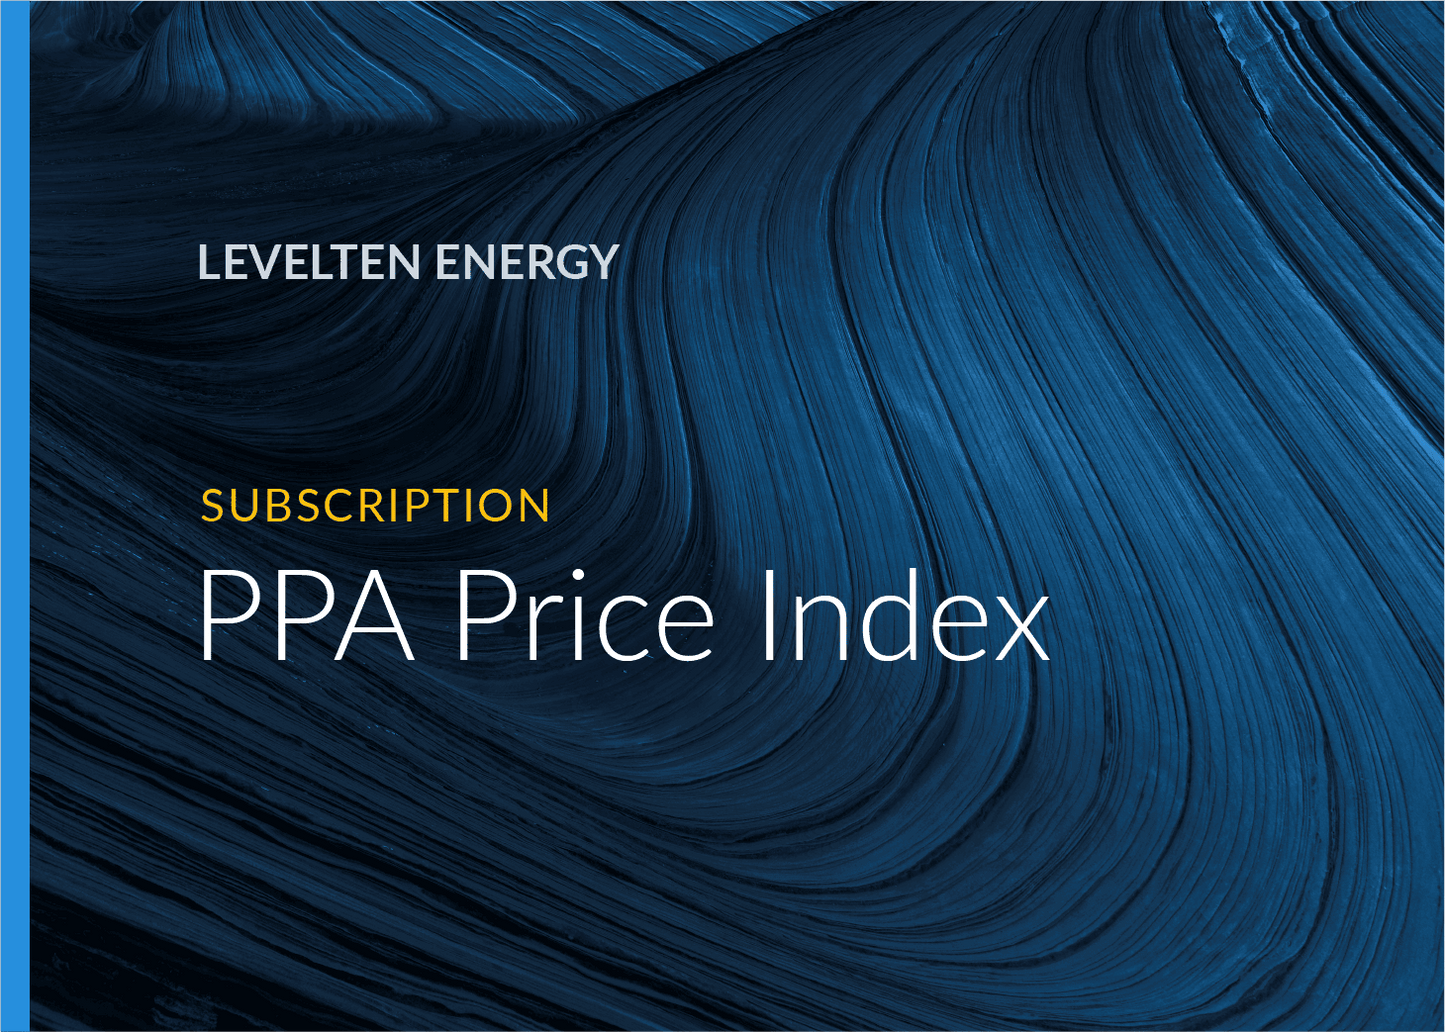 PPA Price Index Subscription - Europe